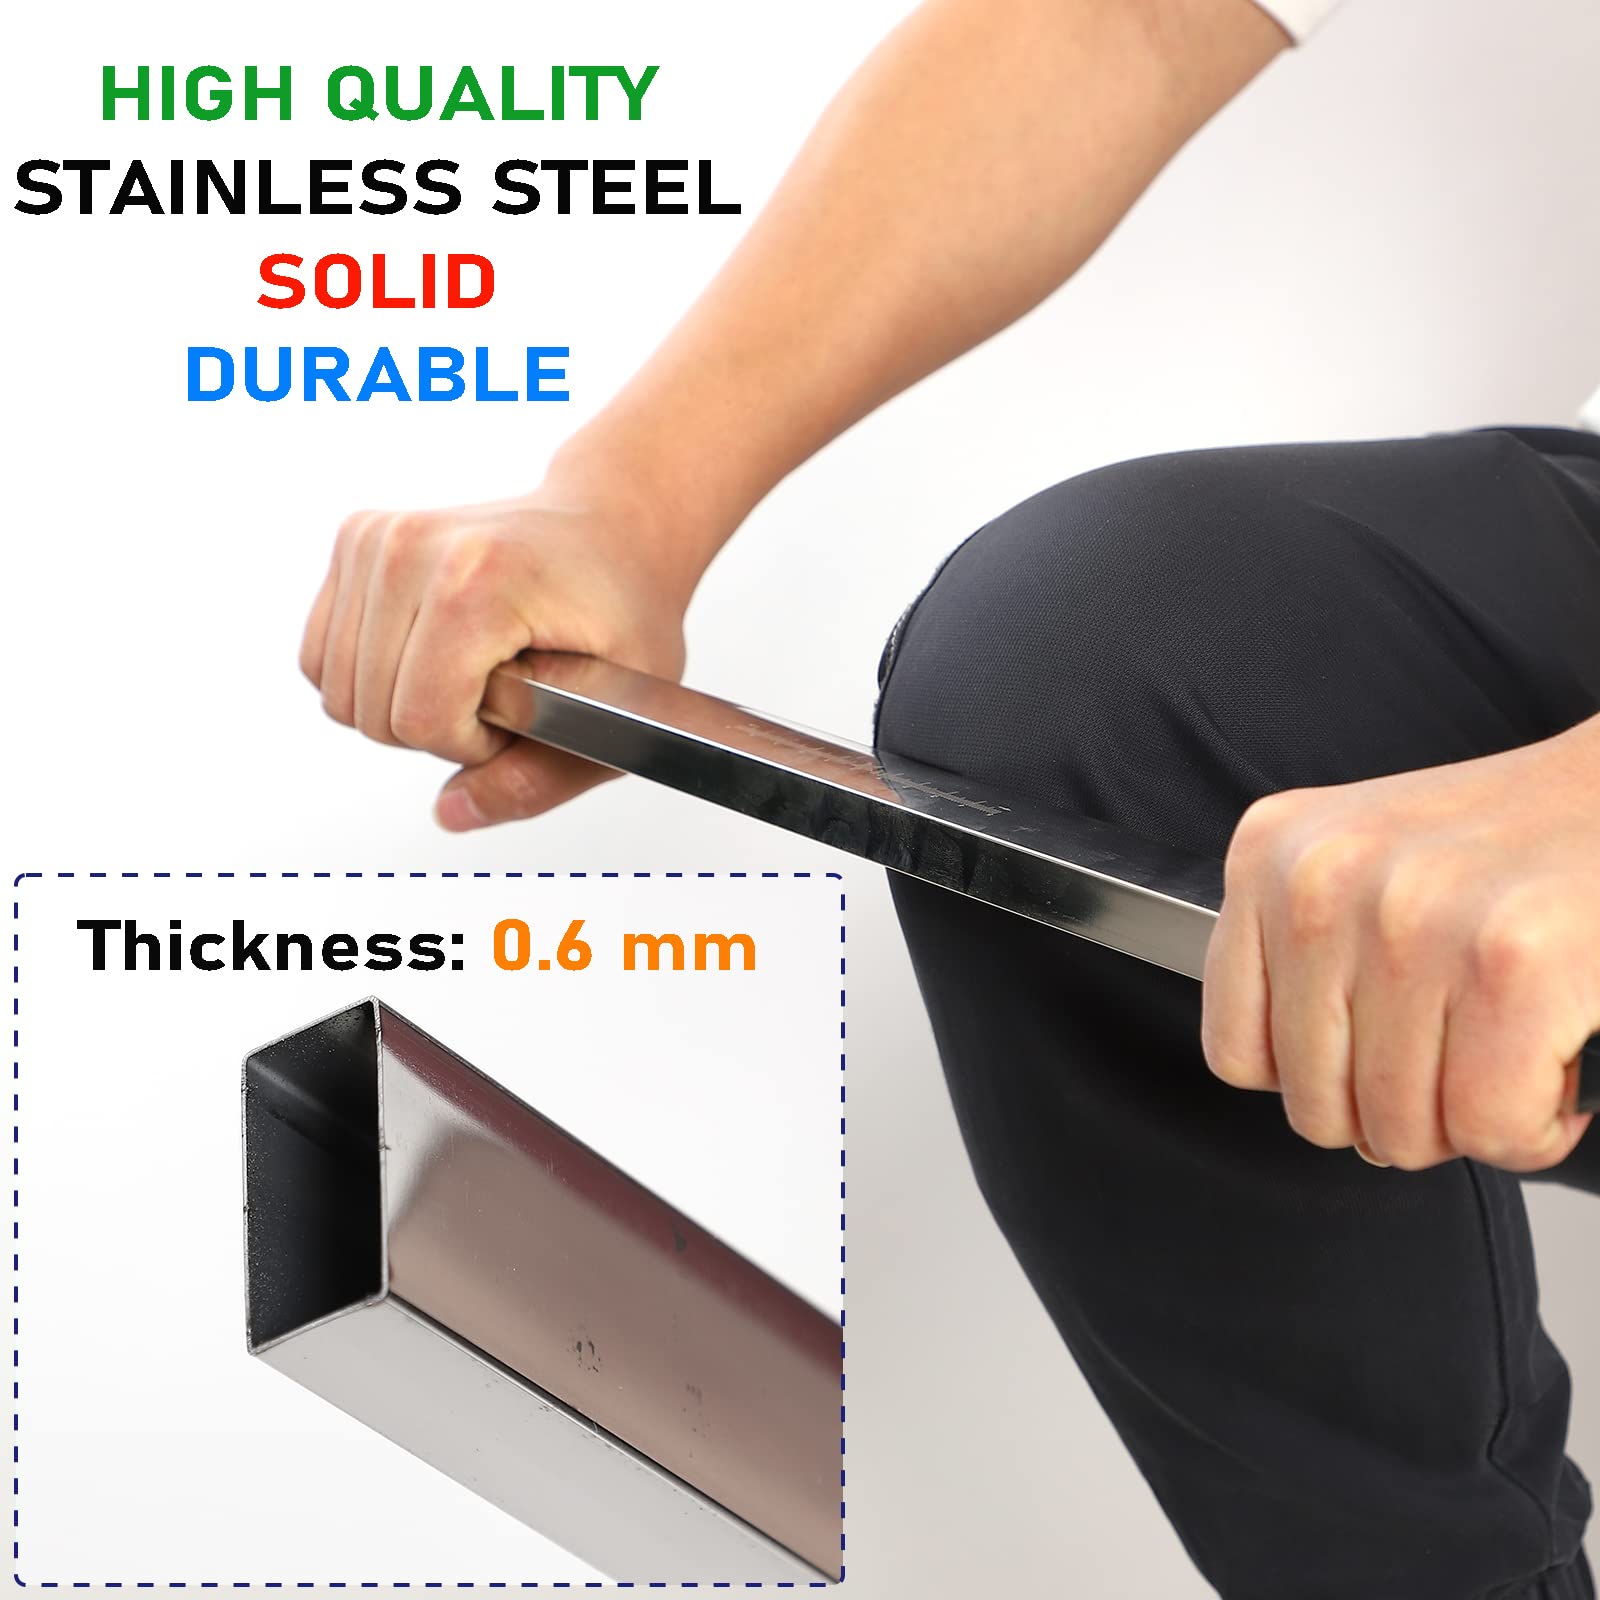 Washer and Dryer stand-Adjustable Refrigerator stand with 4 Heavy Duty Feet Increase 9.4~10.6 inch Height Max Load 570LB/260KG,YiHYSj